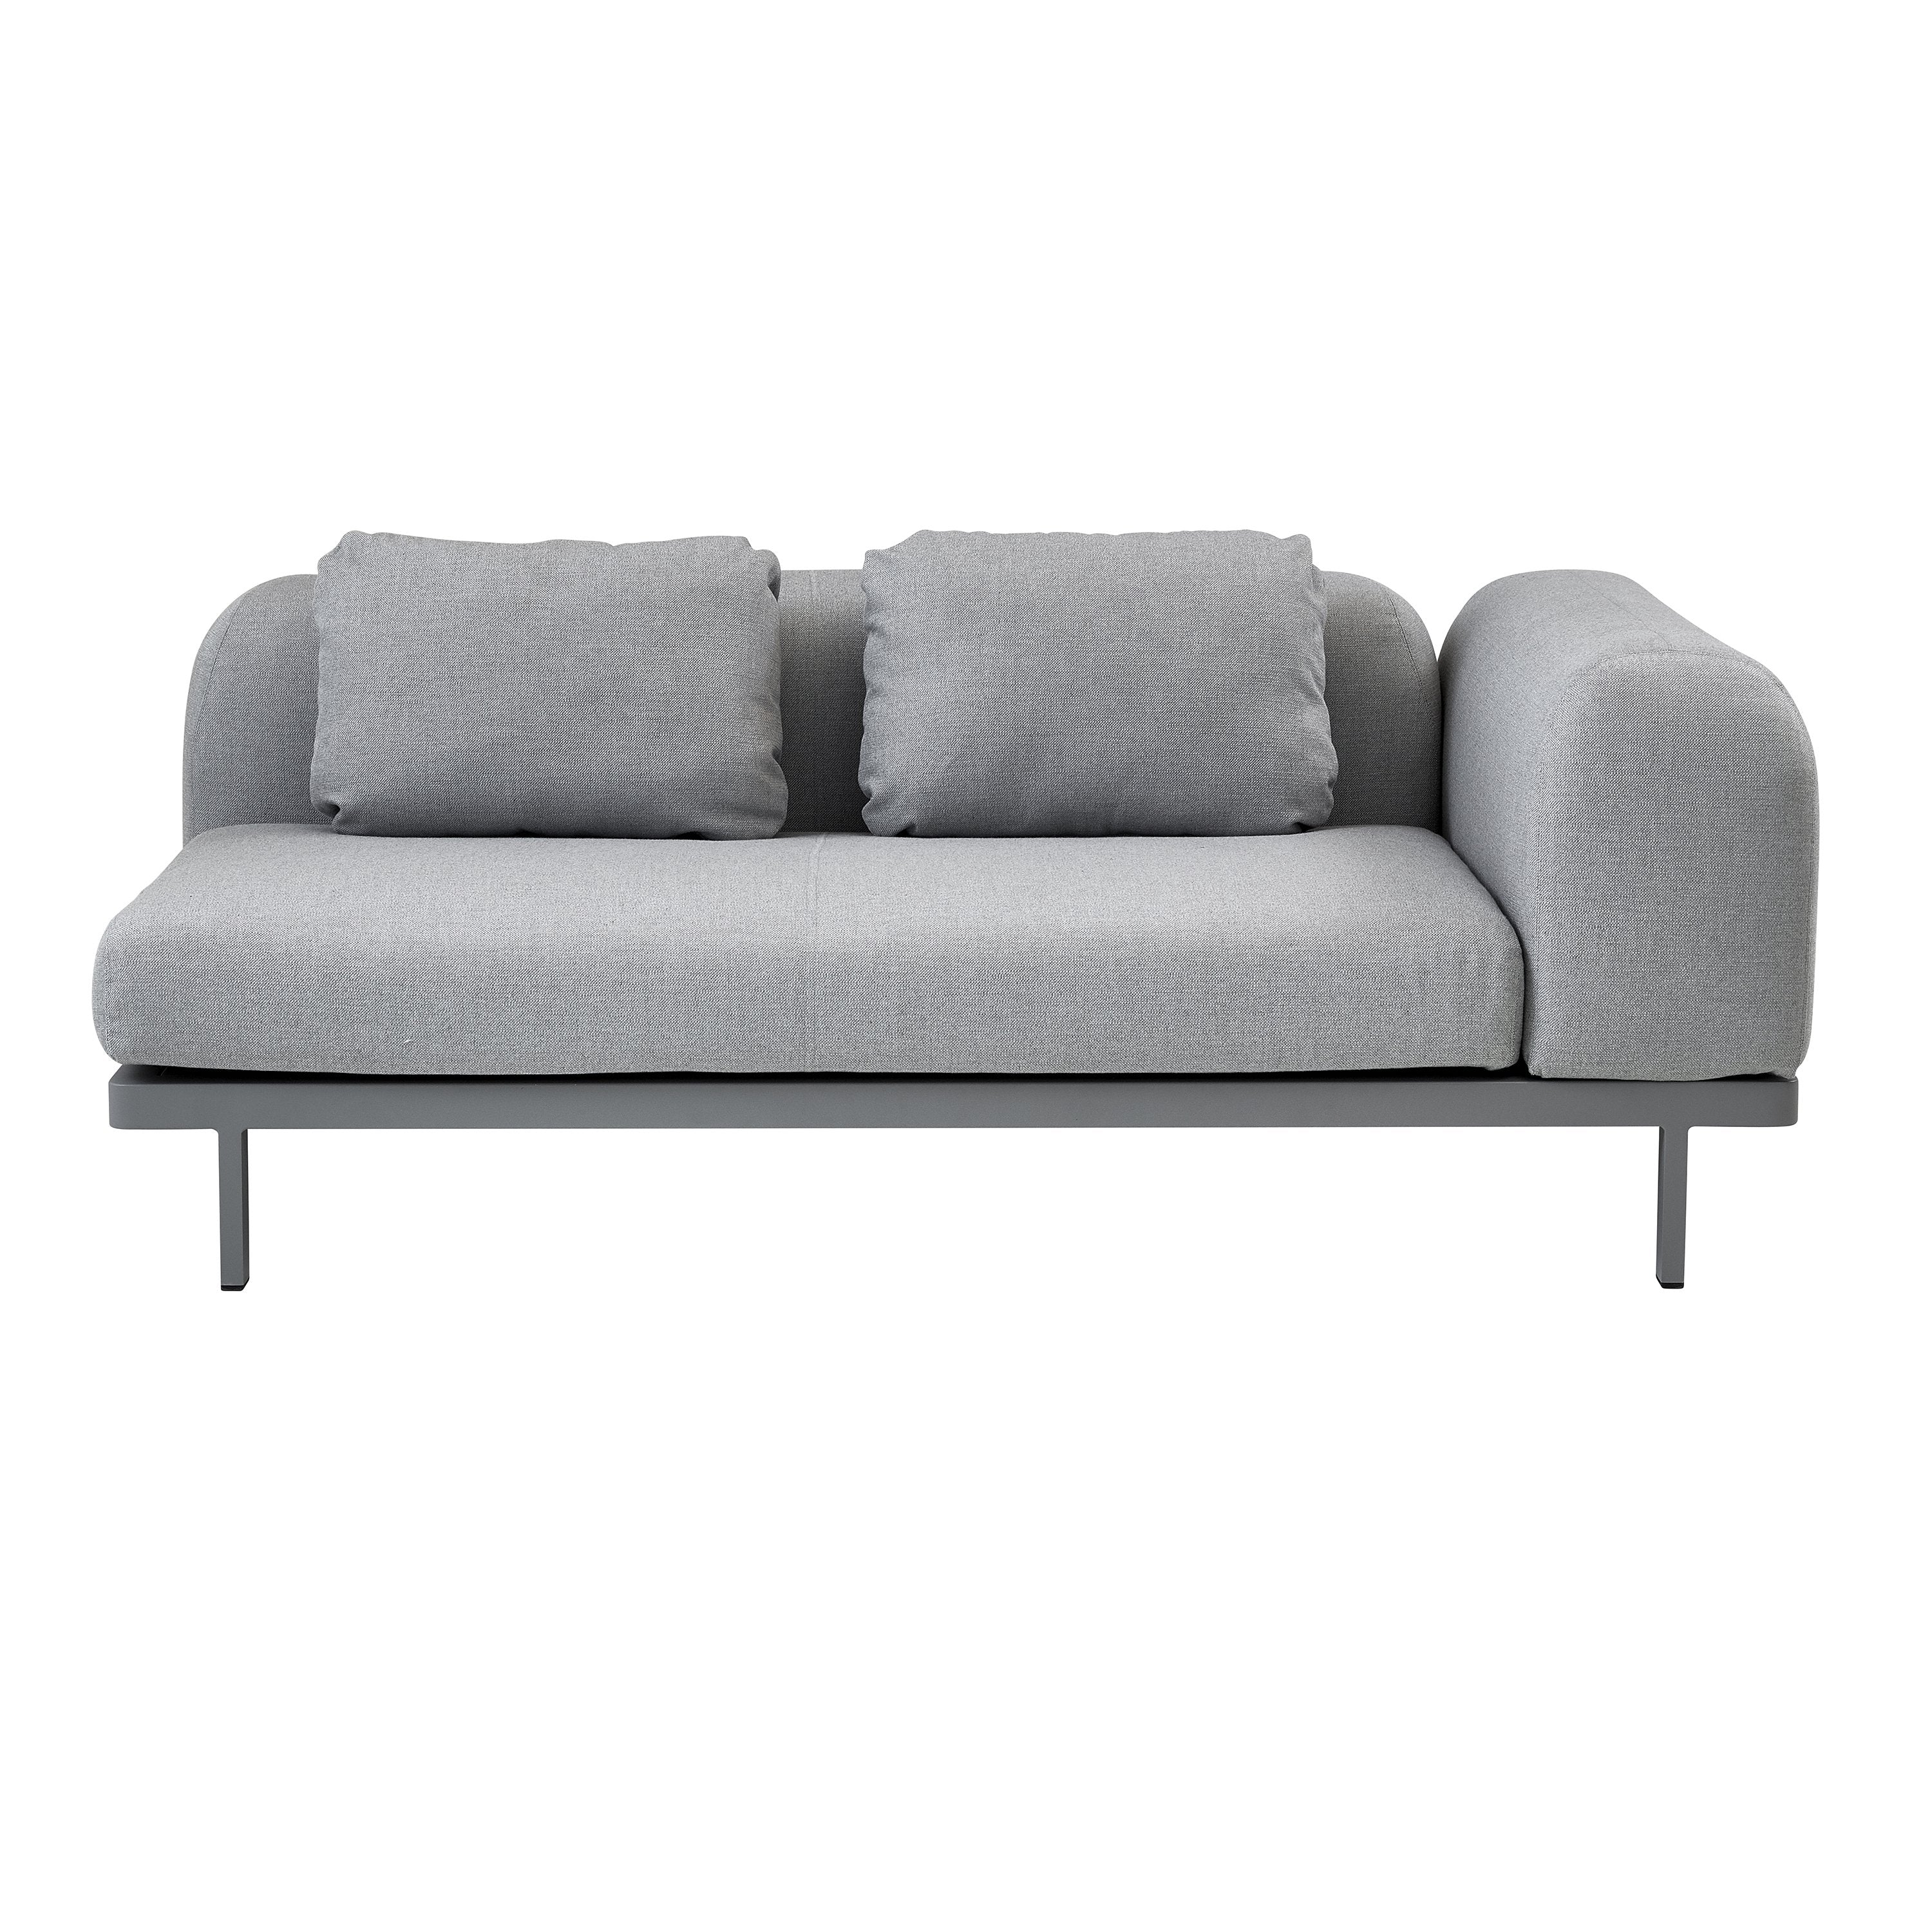 Cane-line Space 2-Seater Sofa